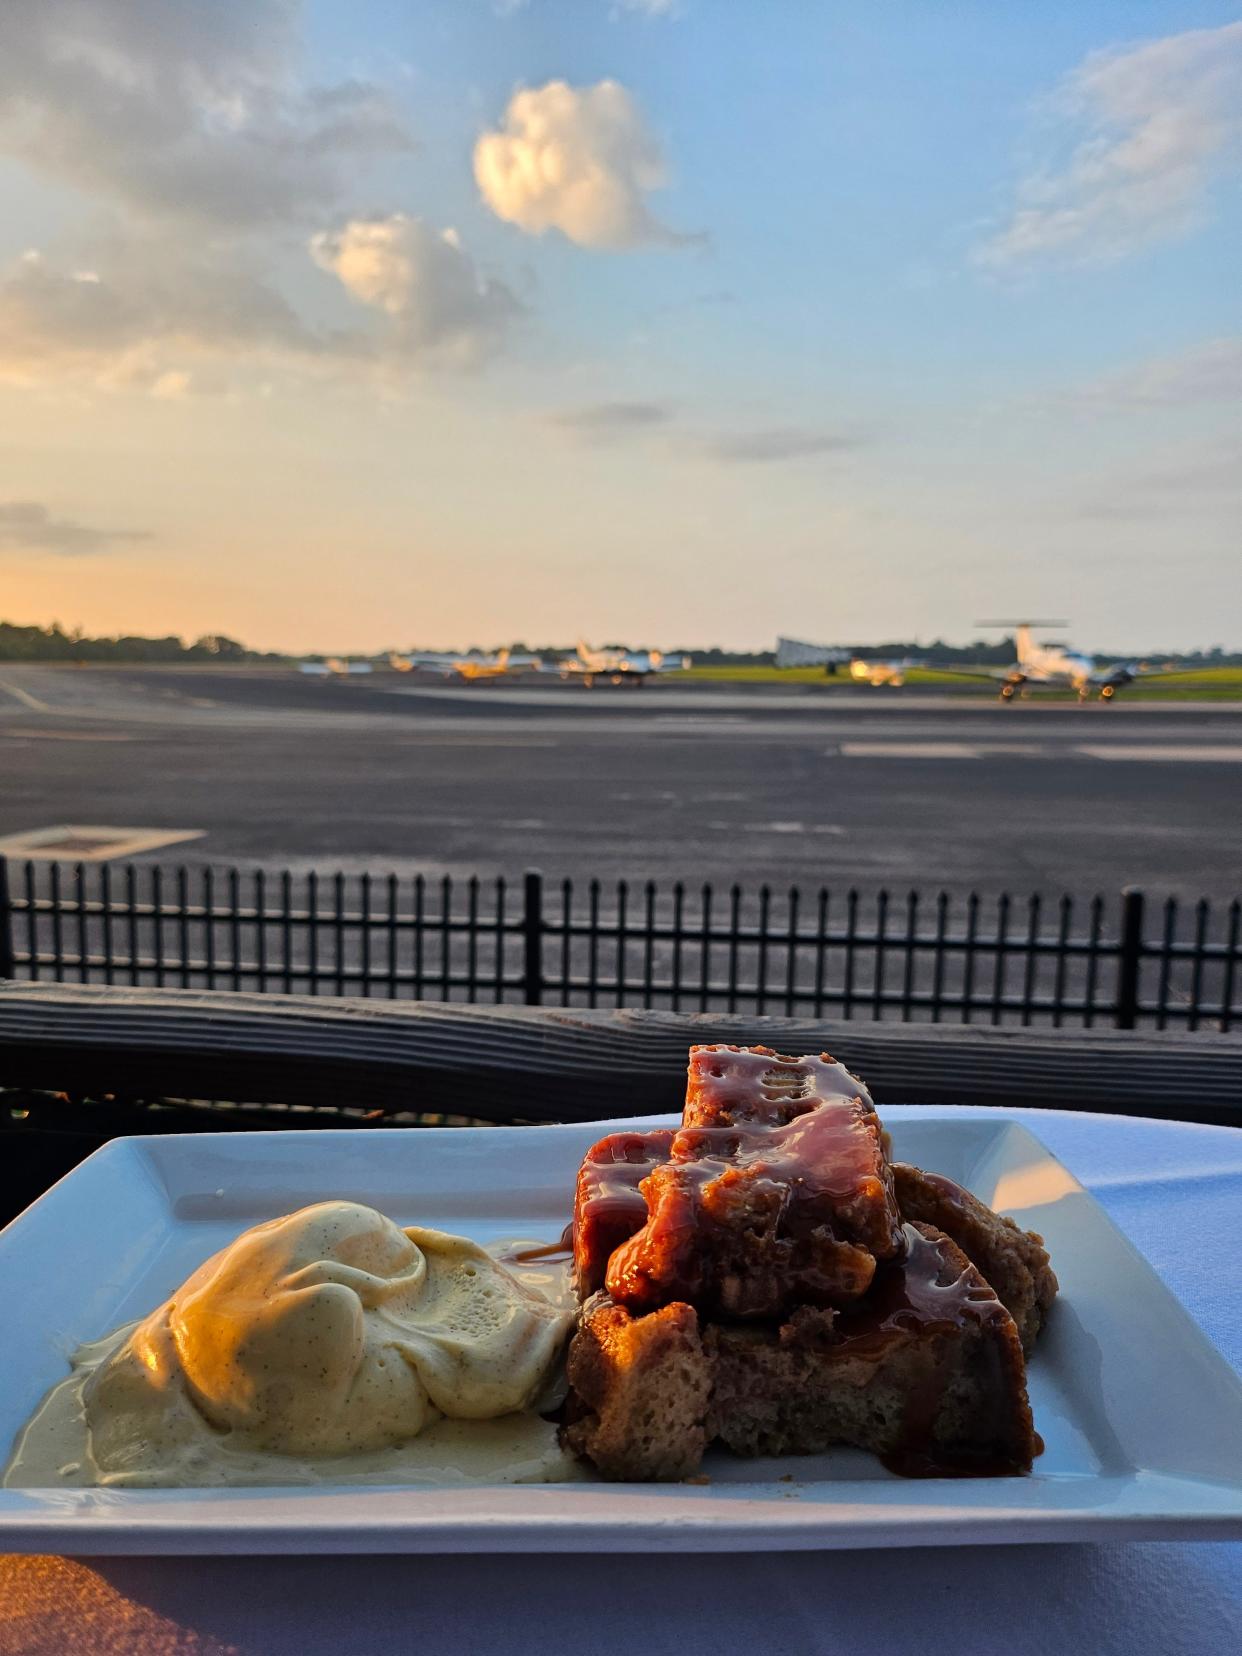 Pain perdu with a view: Parisian-style bread pudding spiked with brandy and topped with warm caramel sauce served a la mode on the back deck at Bistro Le Relais in Louisville.